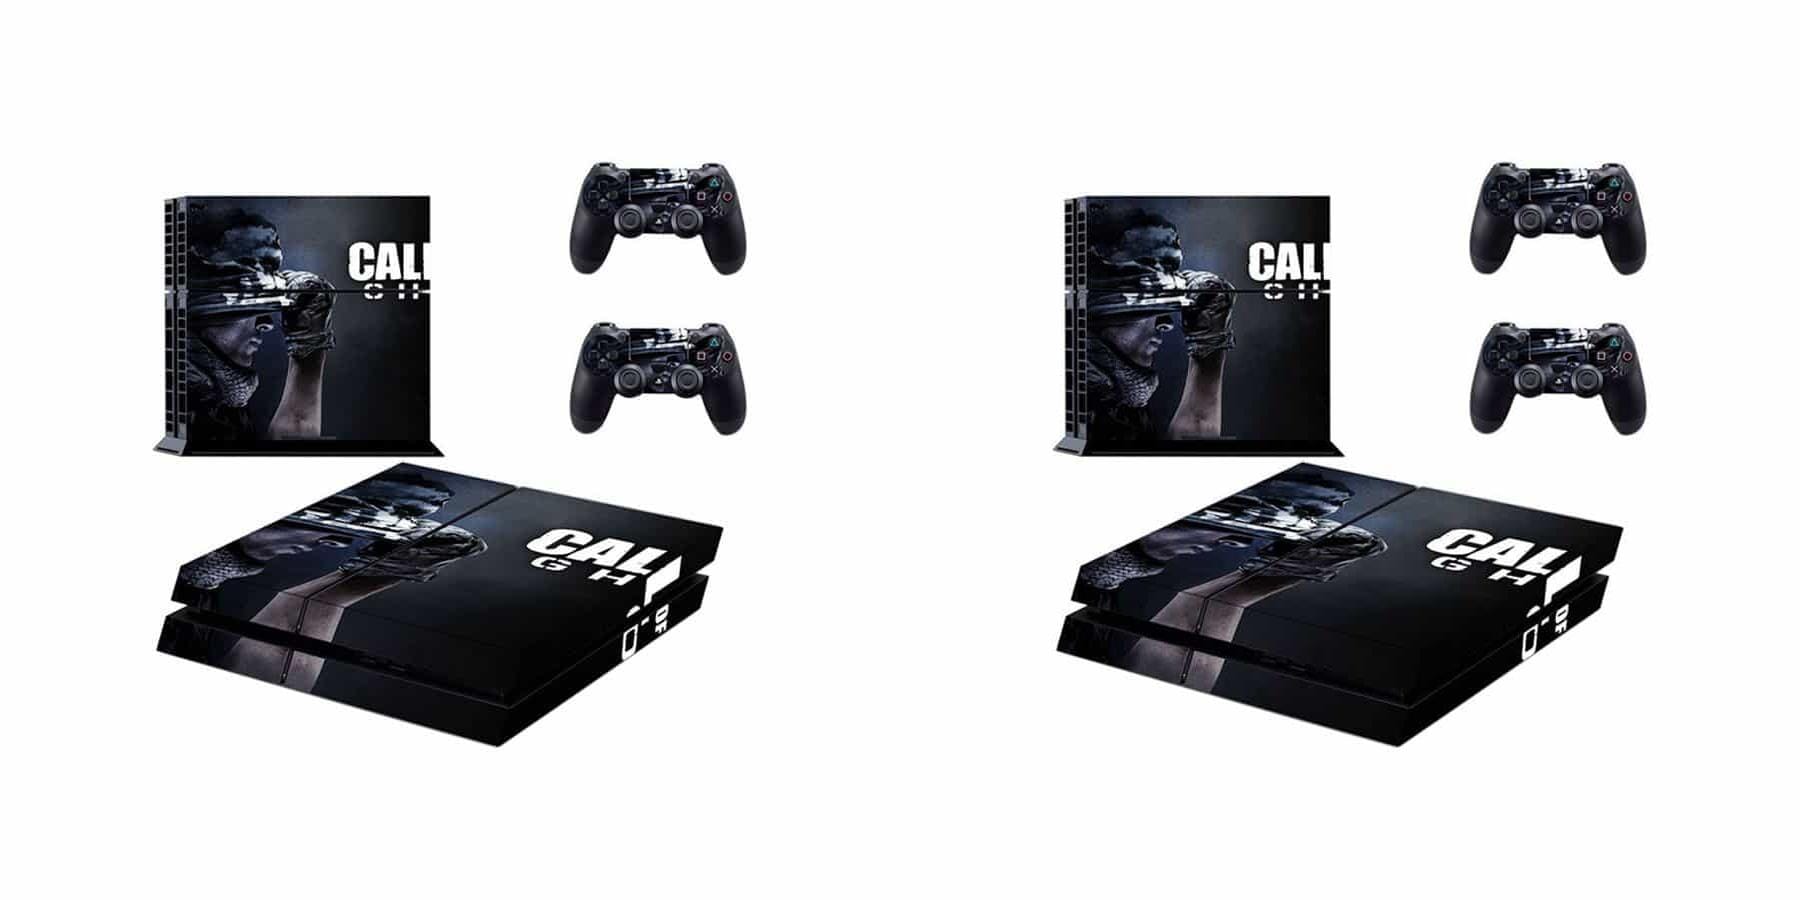 Set of 2 Call of Duty Sticker for PlayStation 4 - ps4s3370